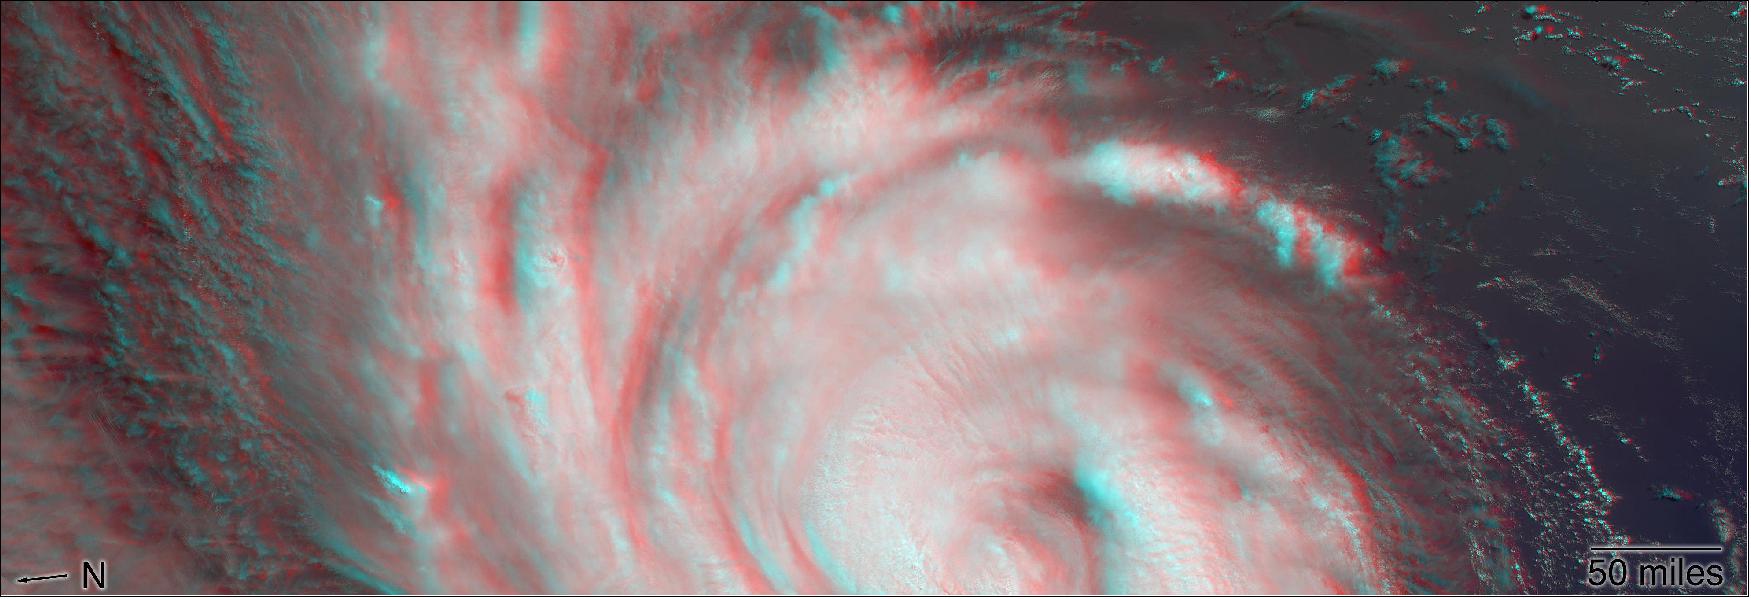 Figure 9: These data were captured during Terra orbit 99670. The MISR instrument, flying onboard NASA's Terra satellite, carries nine cameras that observe Earth at different angles. It takes about seven minutes for all the cameras to observe the same location. This stereo anaglyph shows a 3D view of Florence. You will need red-blue 3D glasses, with the red lens placed over the left eye, to view the effect. The anaglyph shows the high clouds associated with strong thunderstorms in the eyewall of hurricane and individual strong thunderstorms in the outer rain bands. These smaller storms can sometimes spawn tornadoes (image credit: NASA/JPL).